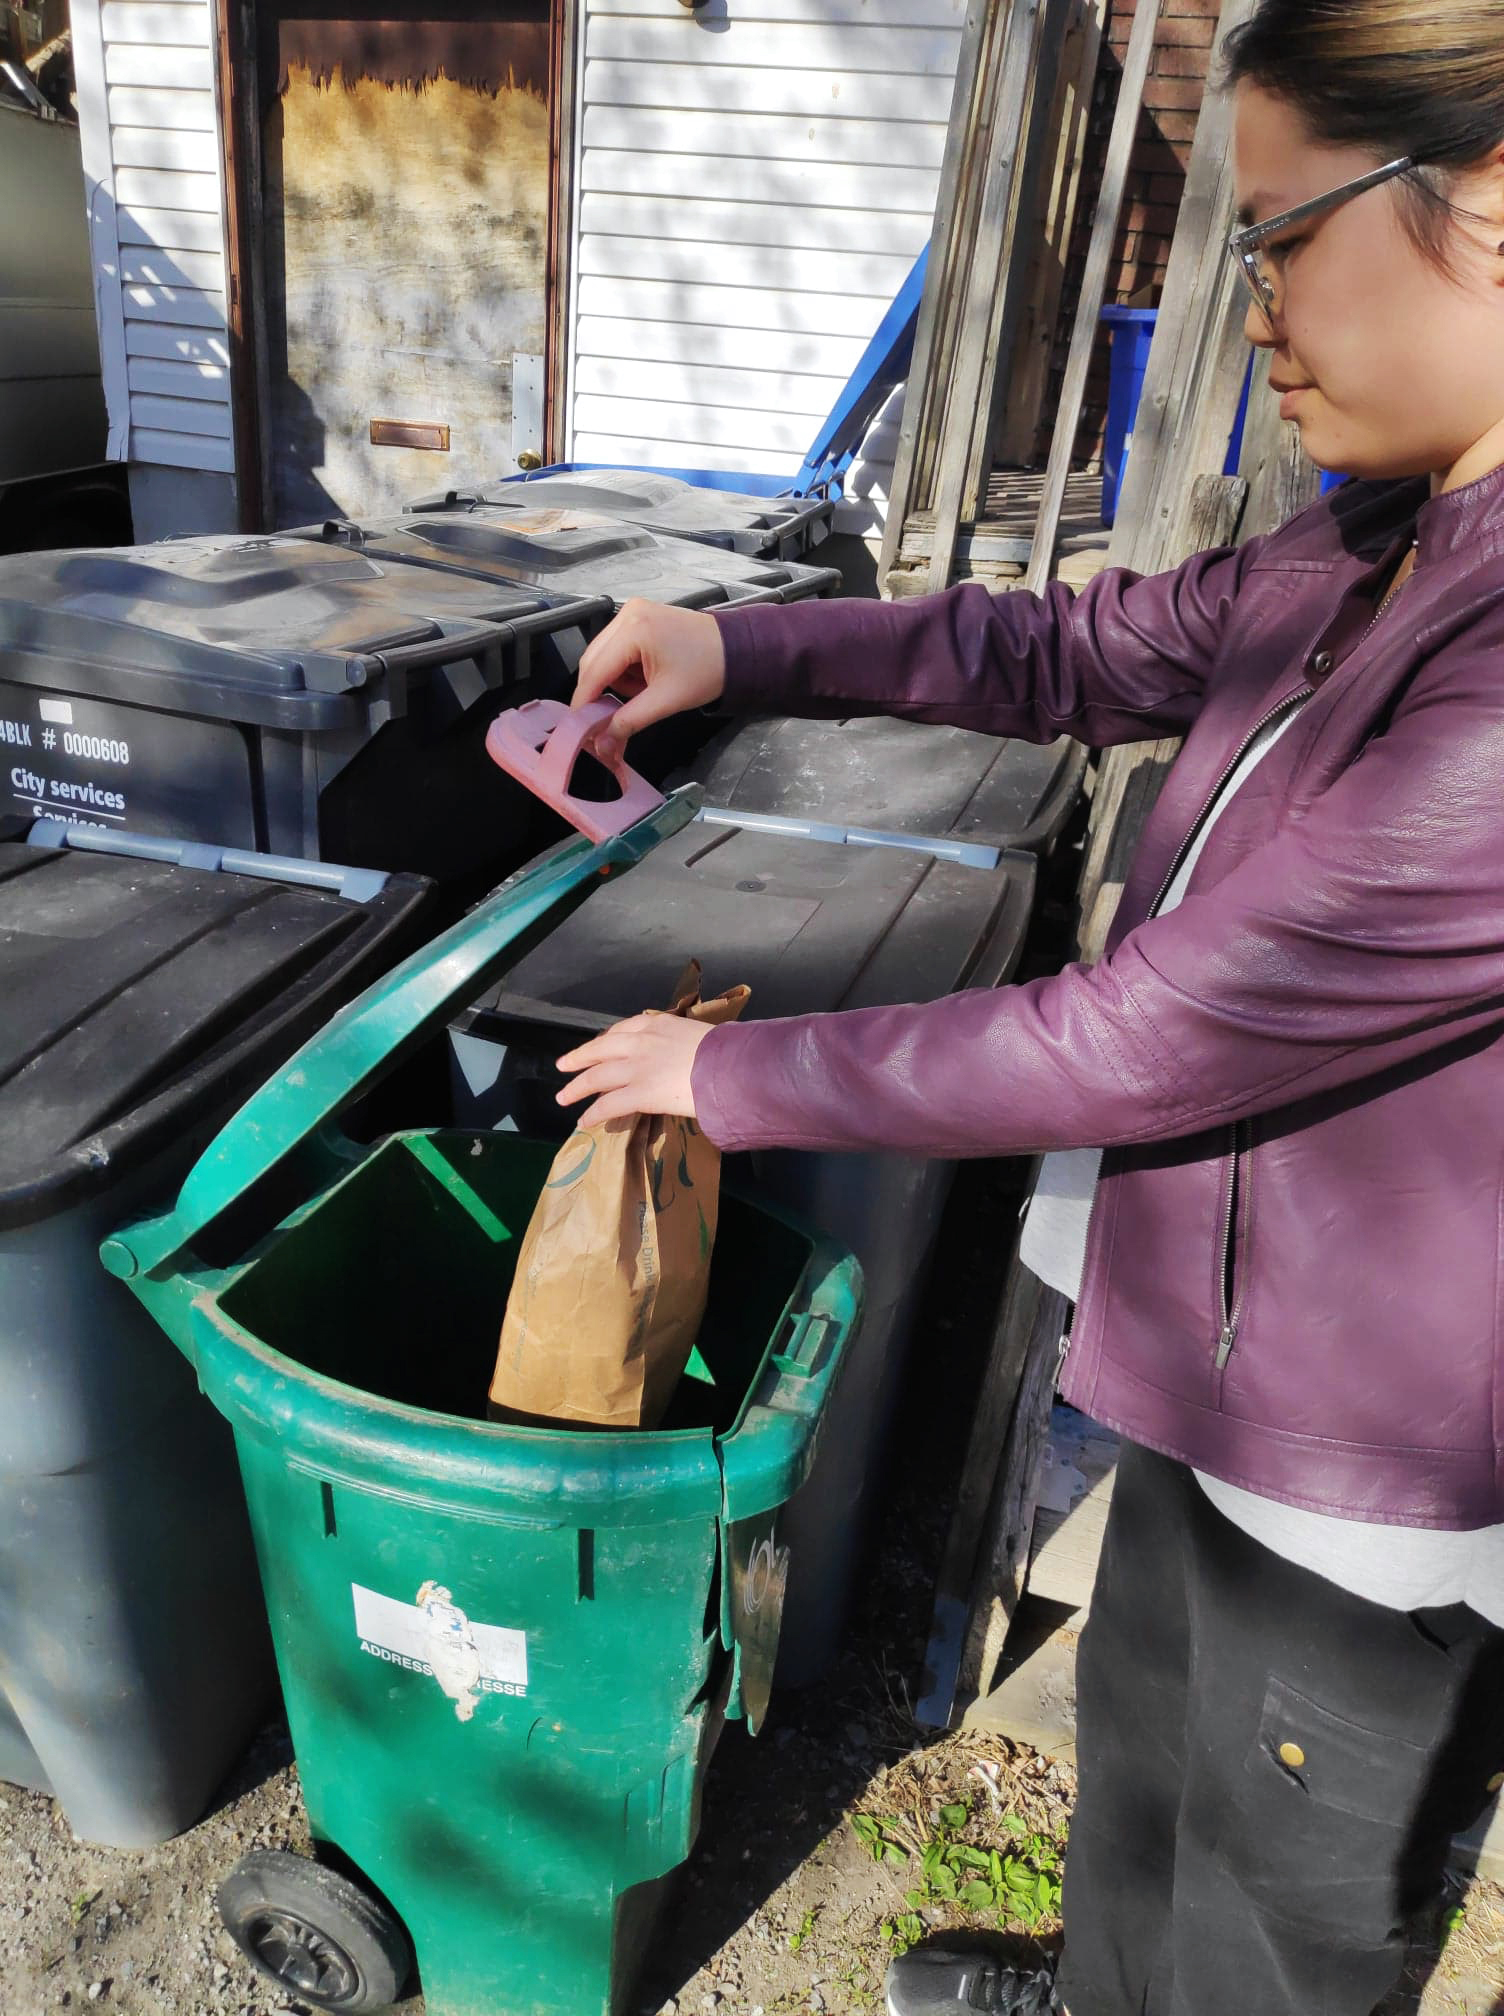 Ocean Bridge youth ambassador Celina Feng from Ottawa, Ontario puts an item into her green bin to compost.